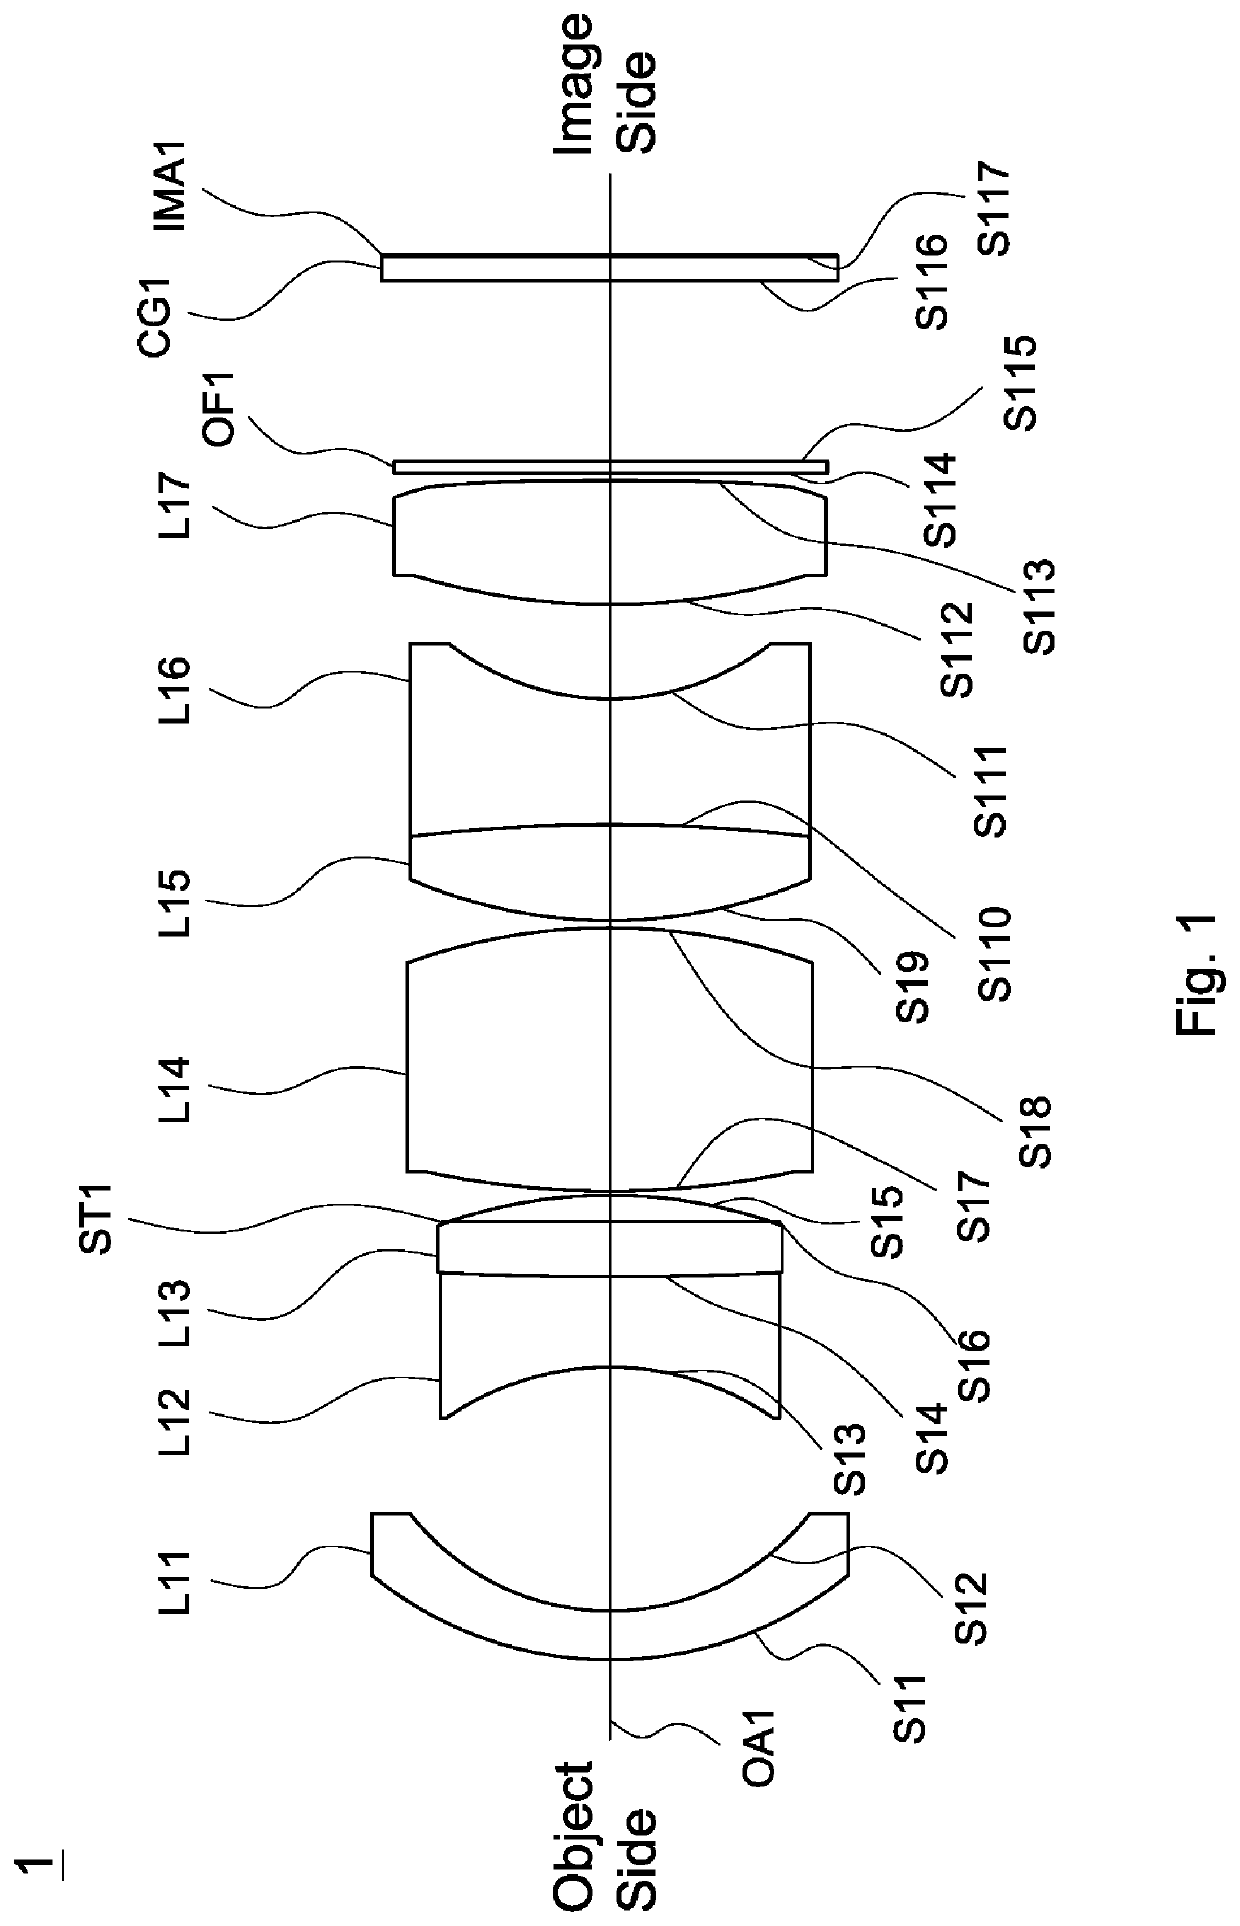 Lens assembly including seven lenses of −−+++−+ refractive powers